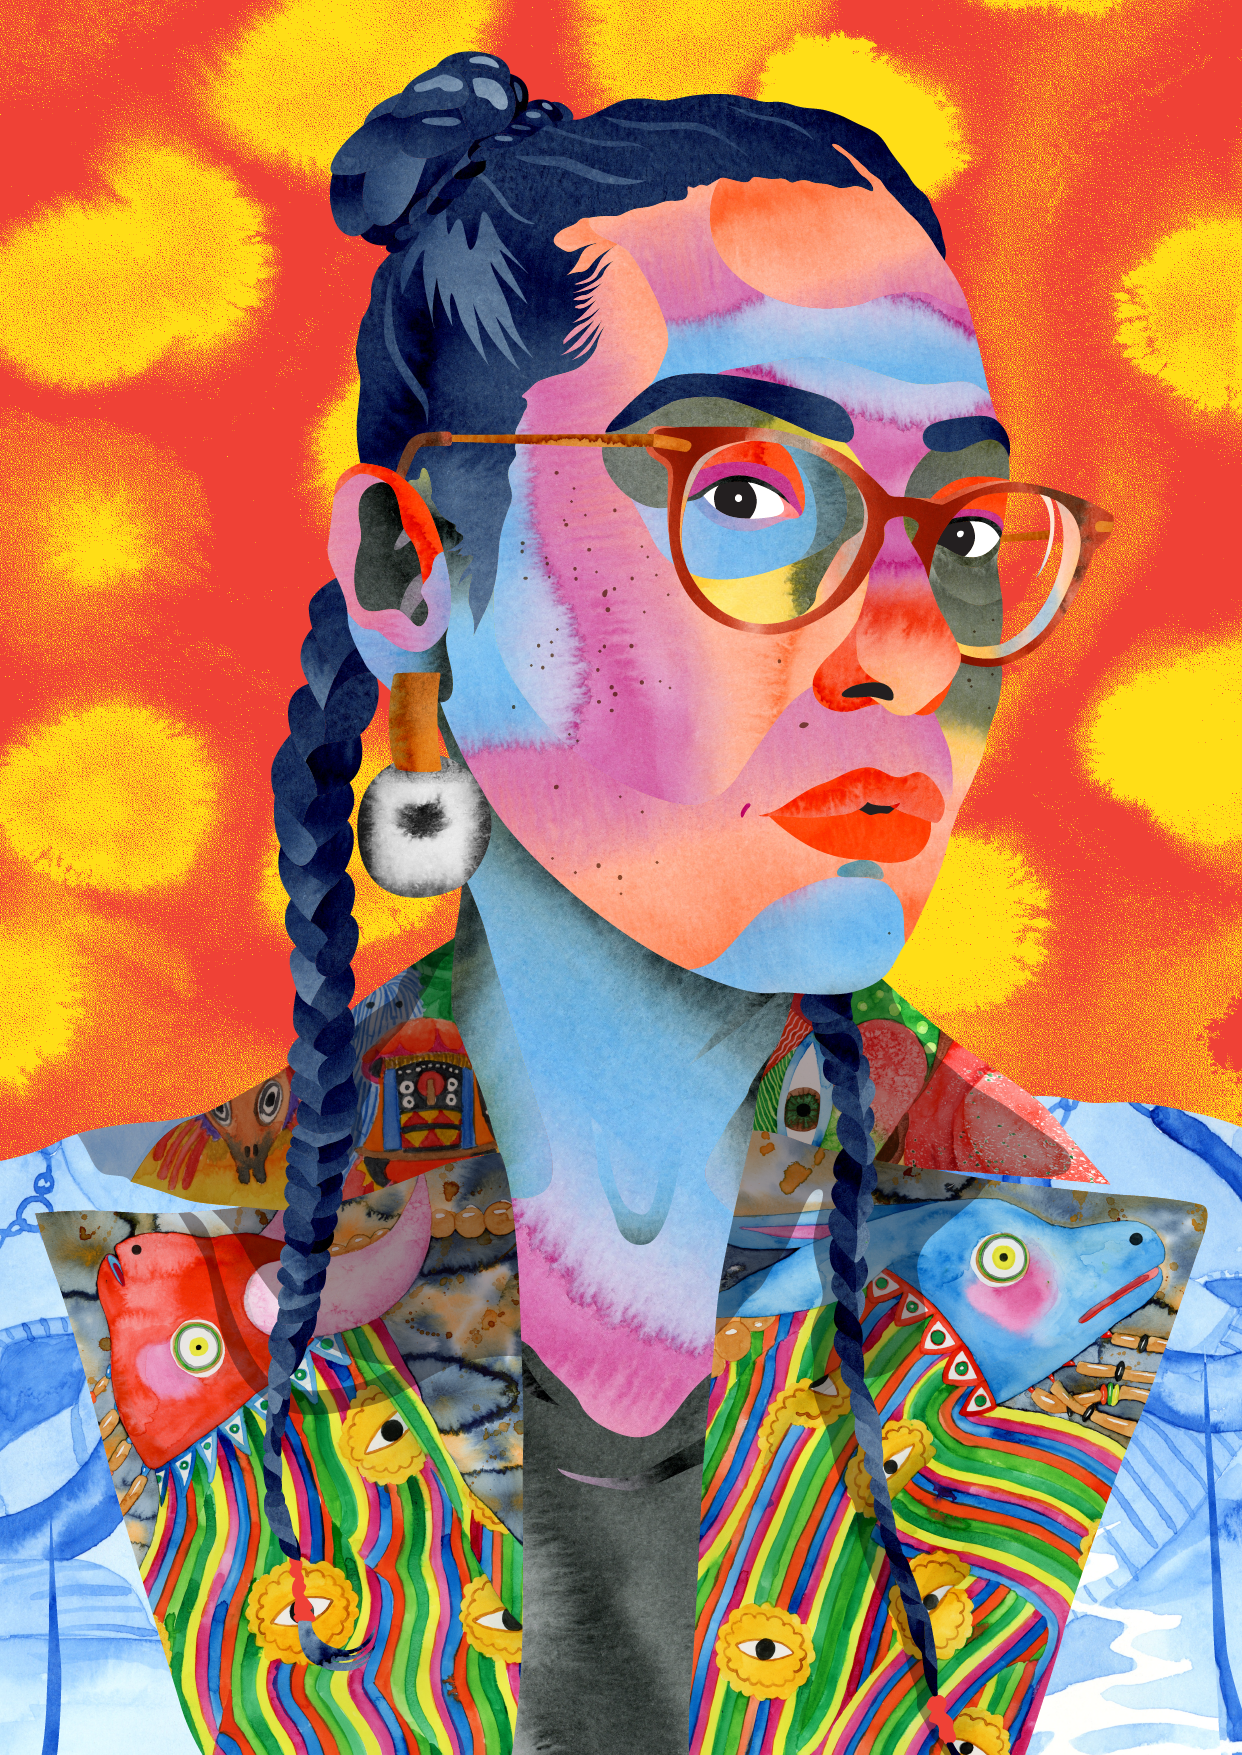 Mulitcolor headshot illustration of Hélène looking straight at the camera. Hélène has black hair styled with a top bun and two braids on each side. Hélène has black eyes and brownish-red framed glasses and bright red lilps. Their skin is multicolored with peach, purple, blue, and orange they have a mulicolored blazer on with a print of fictional animals and yellow eyes. They are wearing a bold earring and have standing in front of a red background with bright yellow splotches.